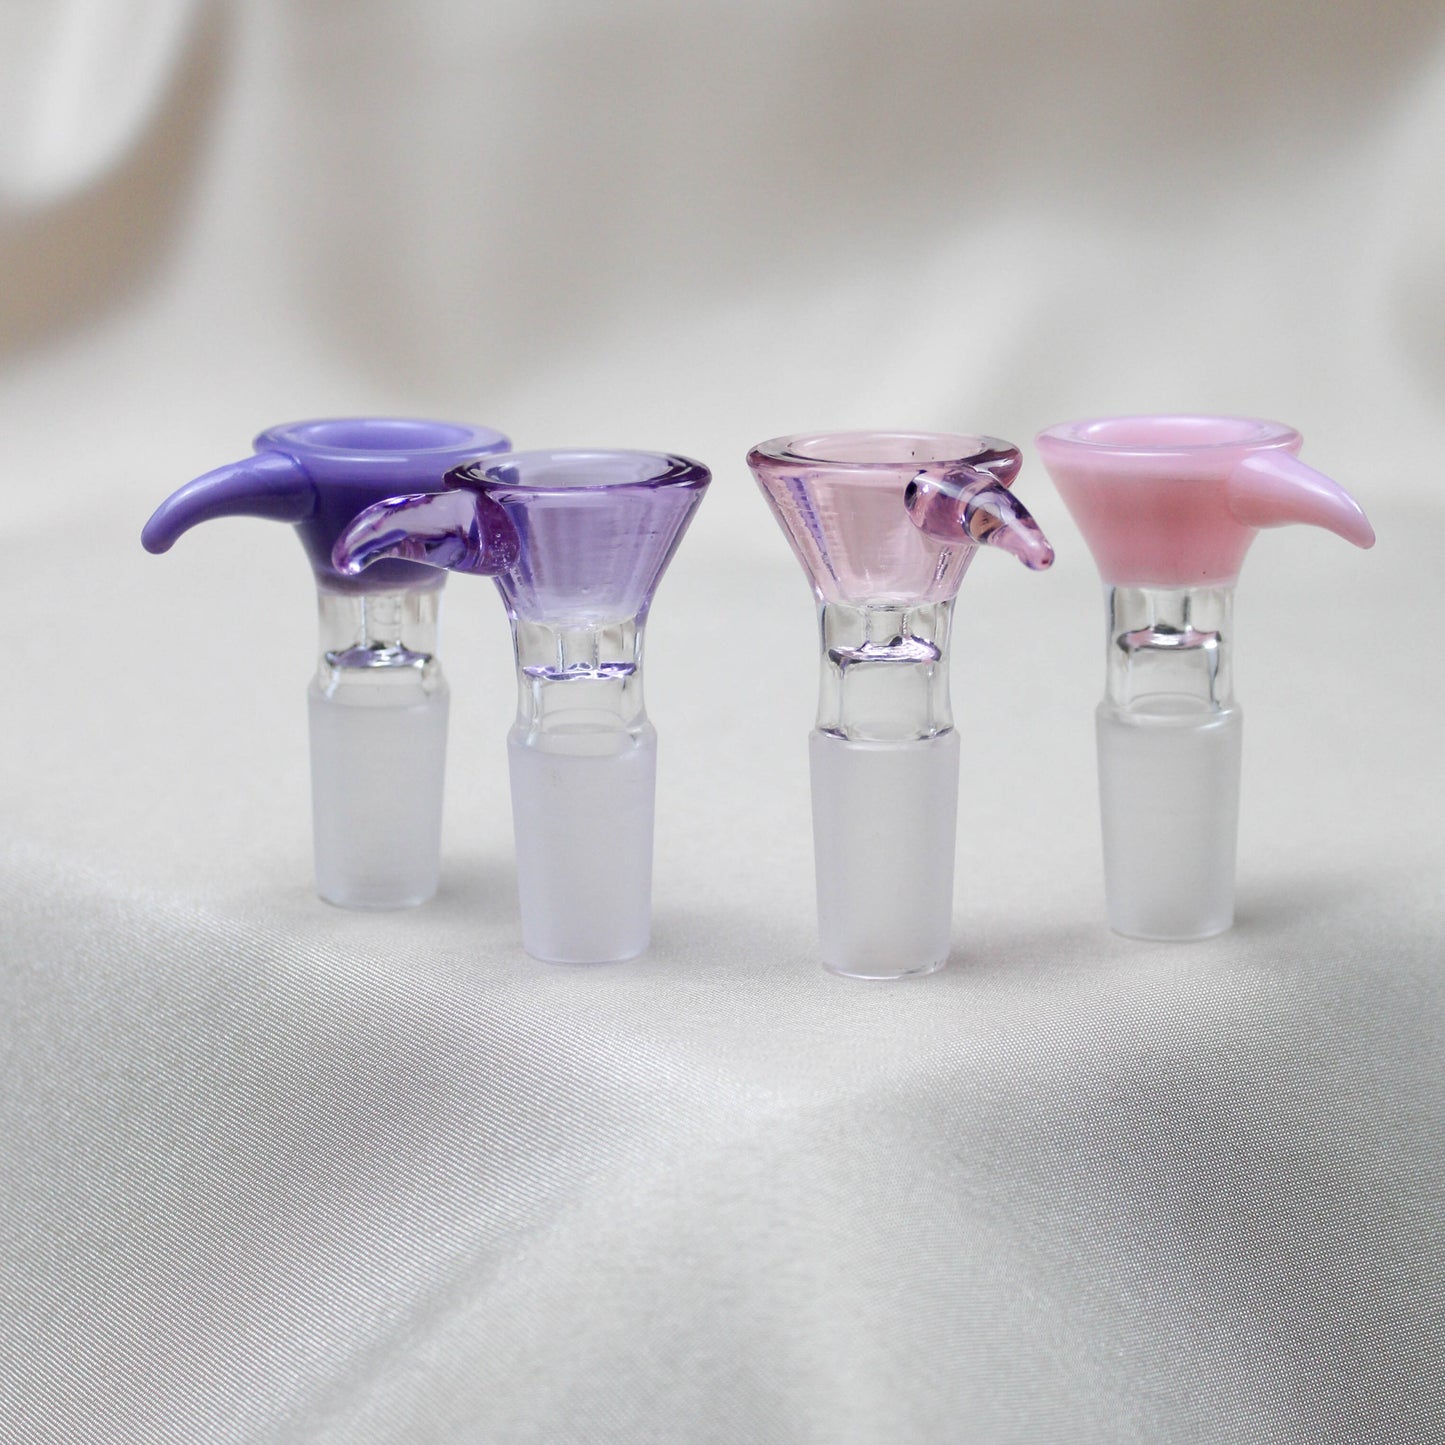 4x Deep Glass Molded Bowl Piece Set 14mm | Clear Purple, Purple, Clear Pink, Pink - PinkRoyalGlass